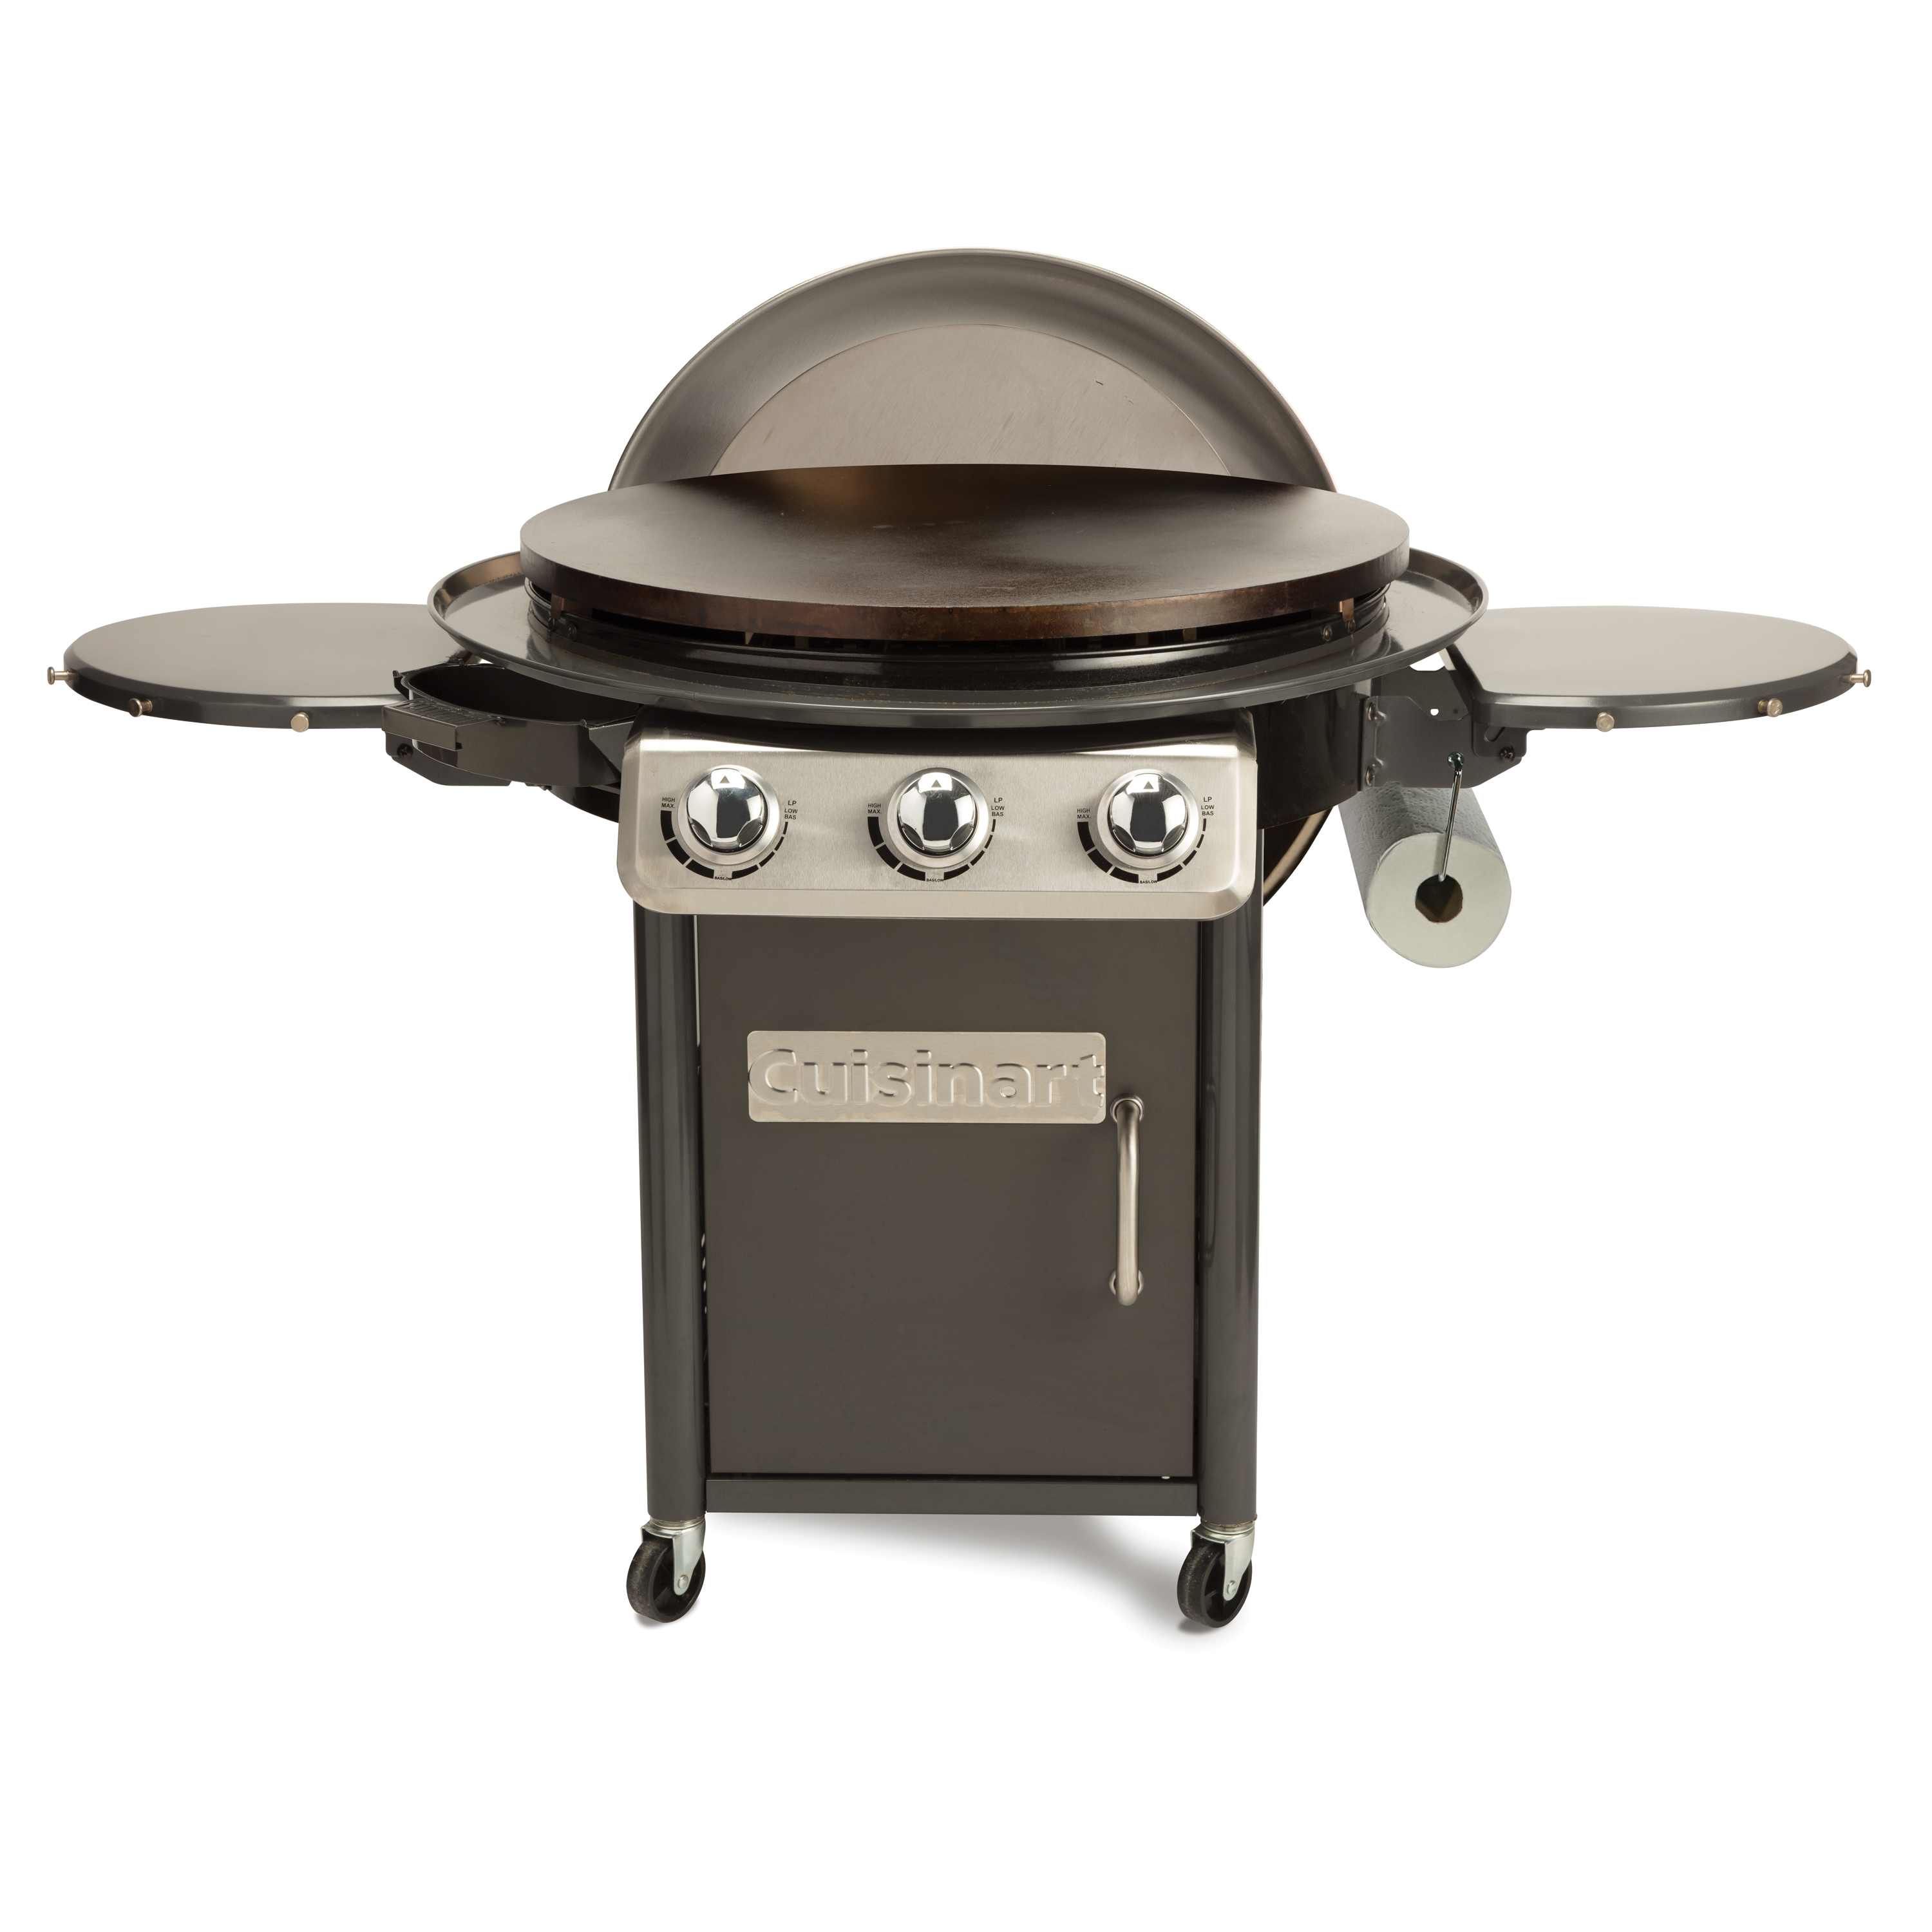 Cuisinart 30-Inch Round Flat Top Surface Outdoor, 360° XL Griddle Cooking Station - image 1 of 3